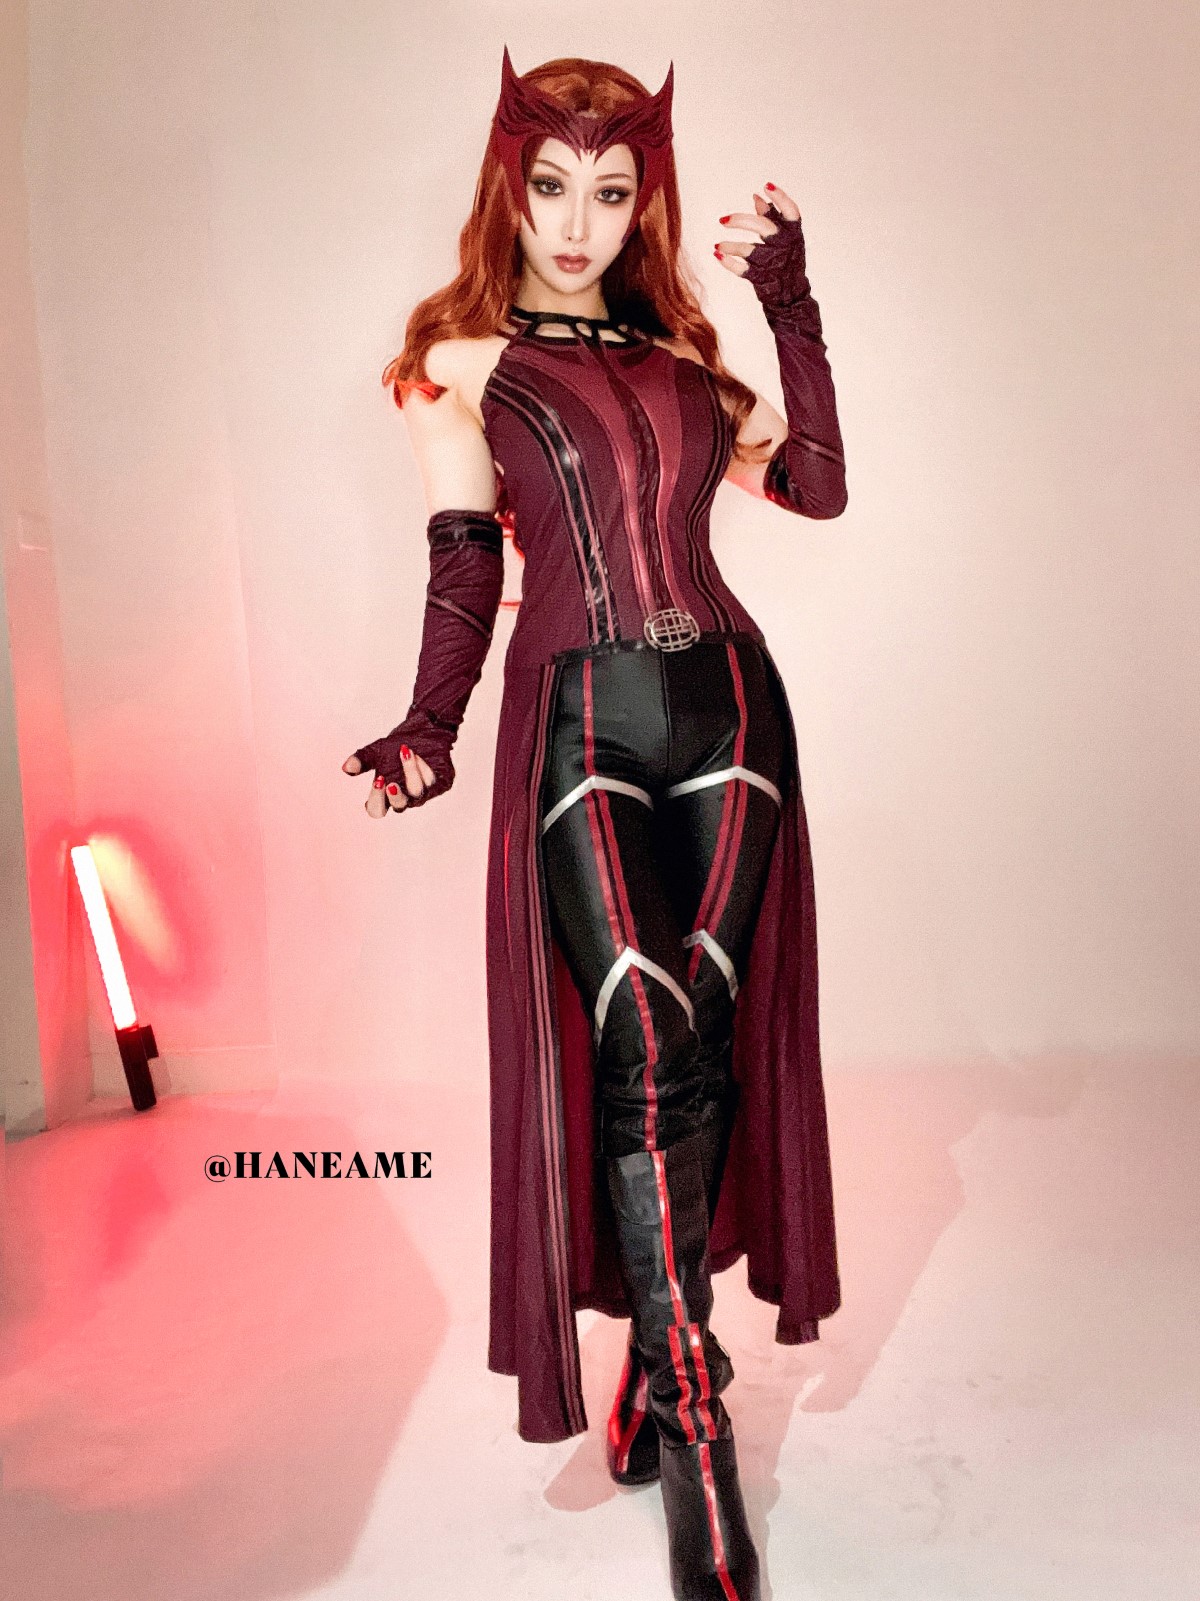 Coser@HaneAme Scarlet Witch 0028 3961233175.jpg